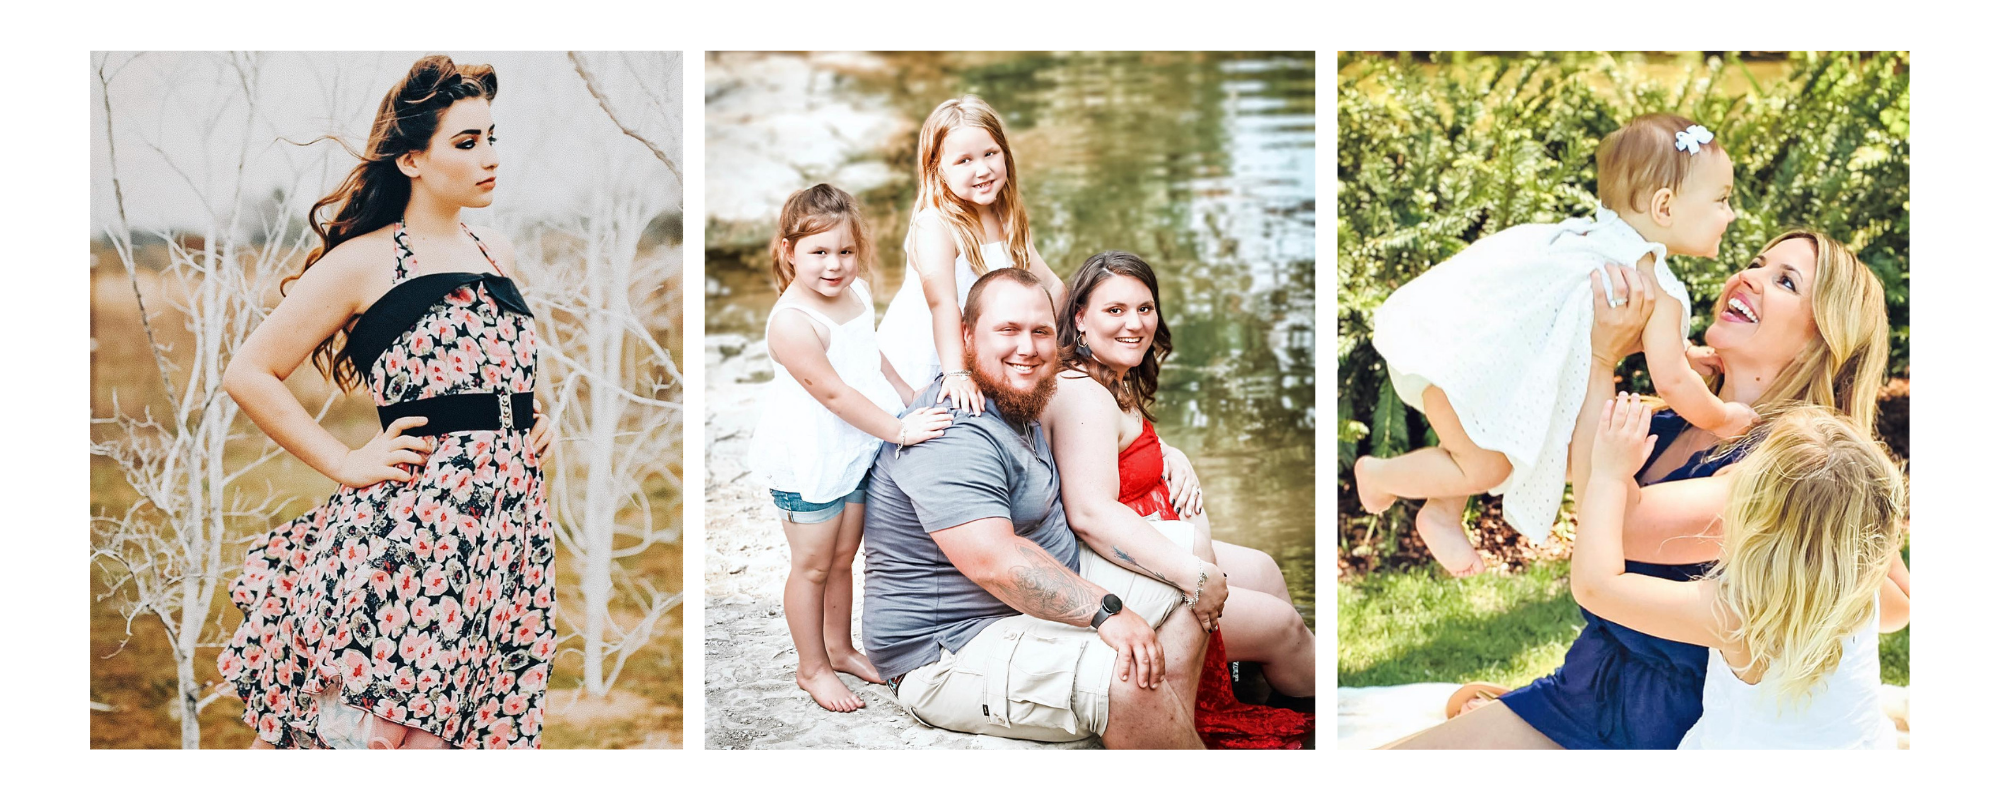 Vintage style photo of a woman, family posing by the lake, and a mommy and me photo session